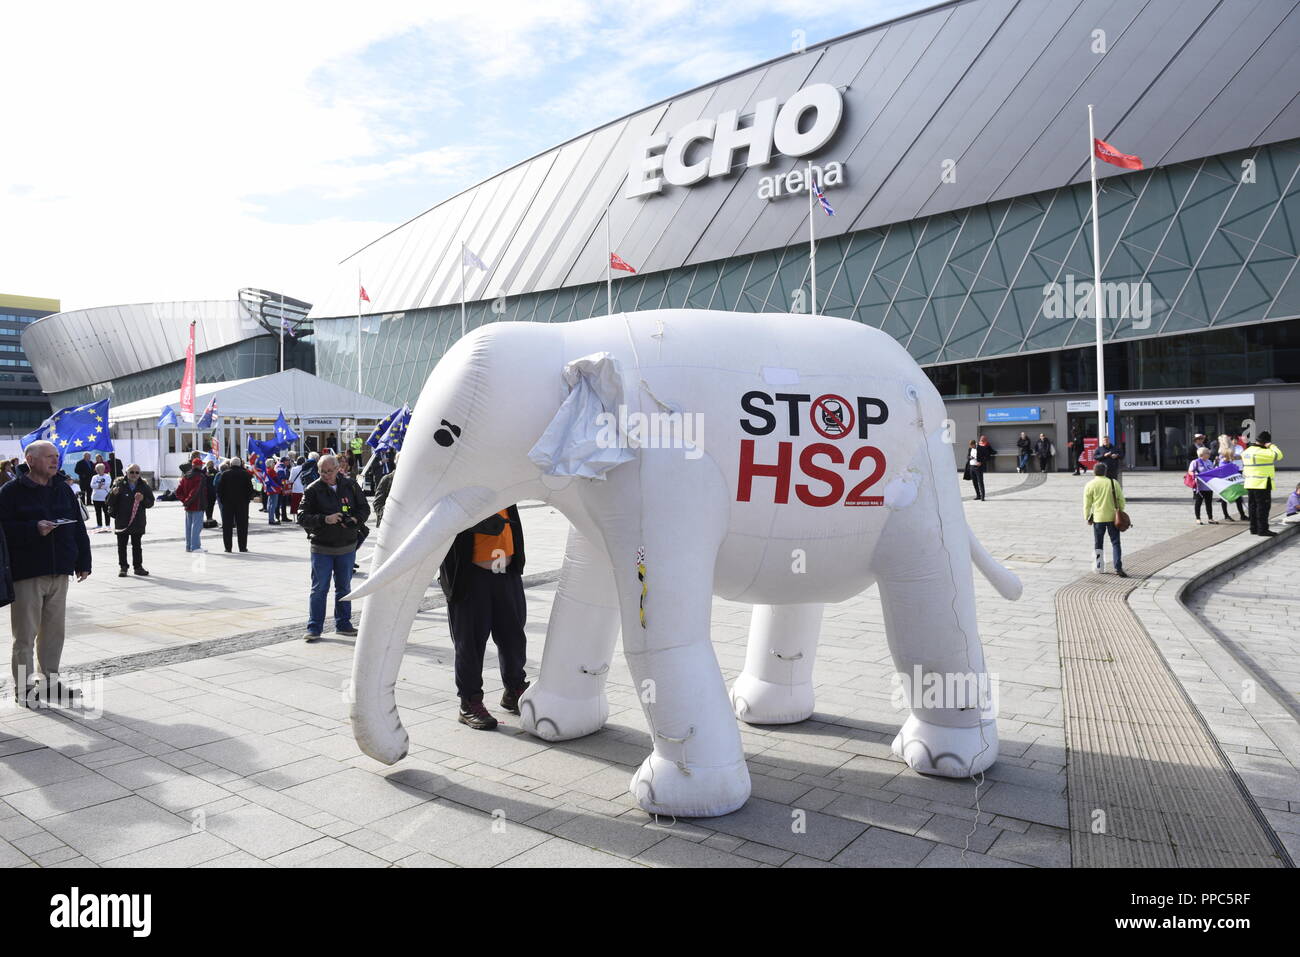 Liverpool, UK, 25th September 2018, Inflatable white elephant with 'Stop HS2' written on it, outside the Echo Arena for the Labour Party Conference. Credit David J Colbran / Alamy Live News Stock Photo